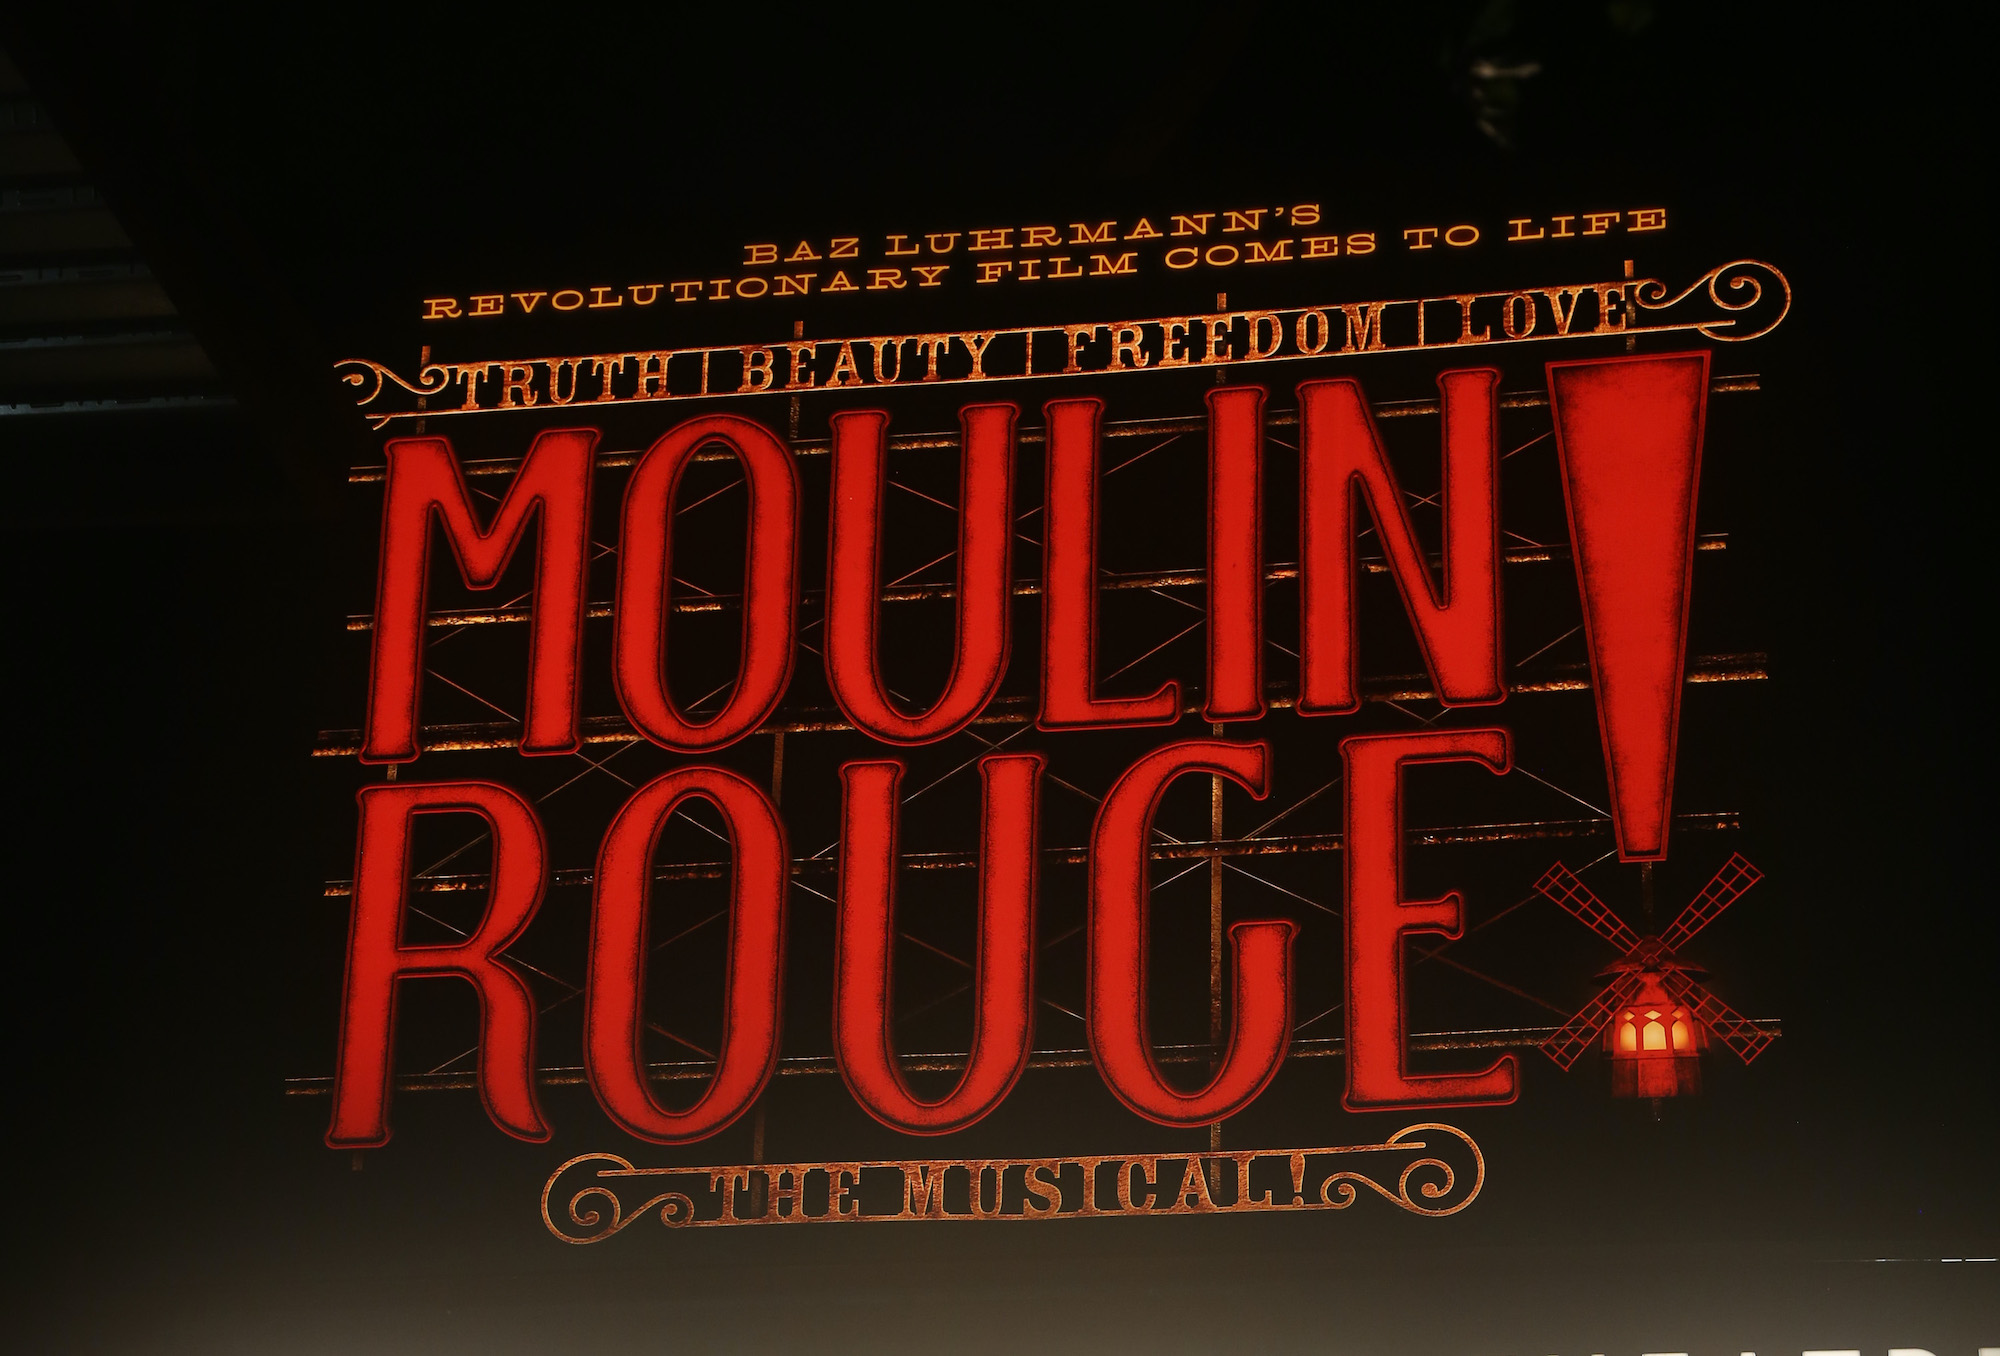 Tony Awards 2021: ‘Moulin Rouge!’ Has Now Won Oscars and Tonys for the Same Categories